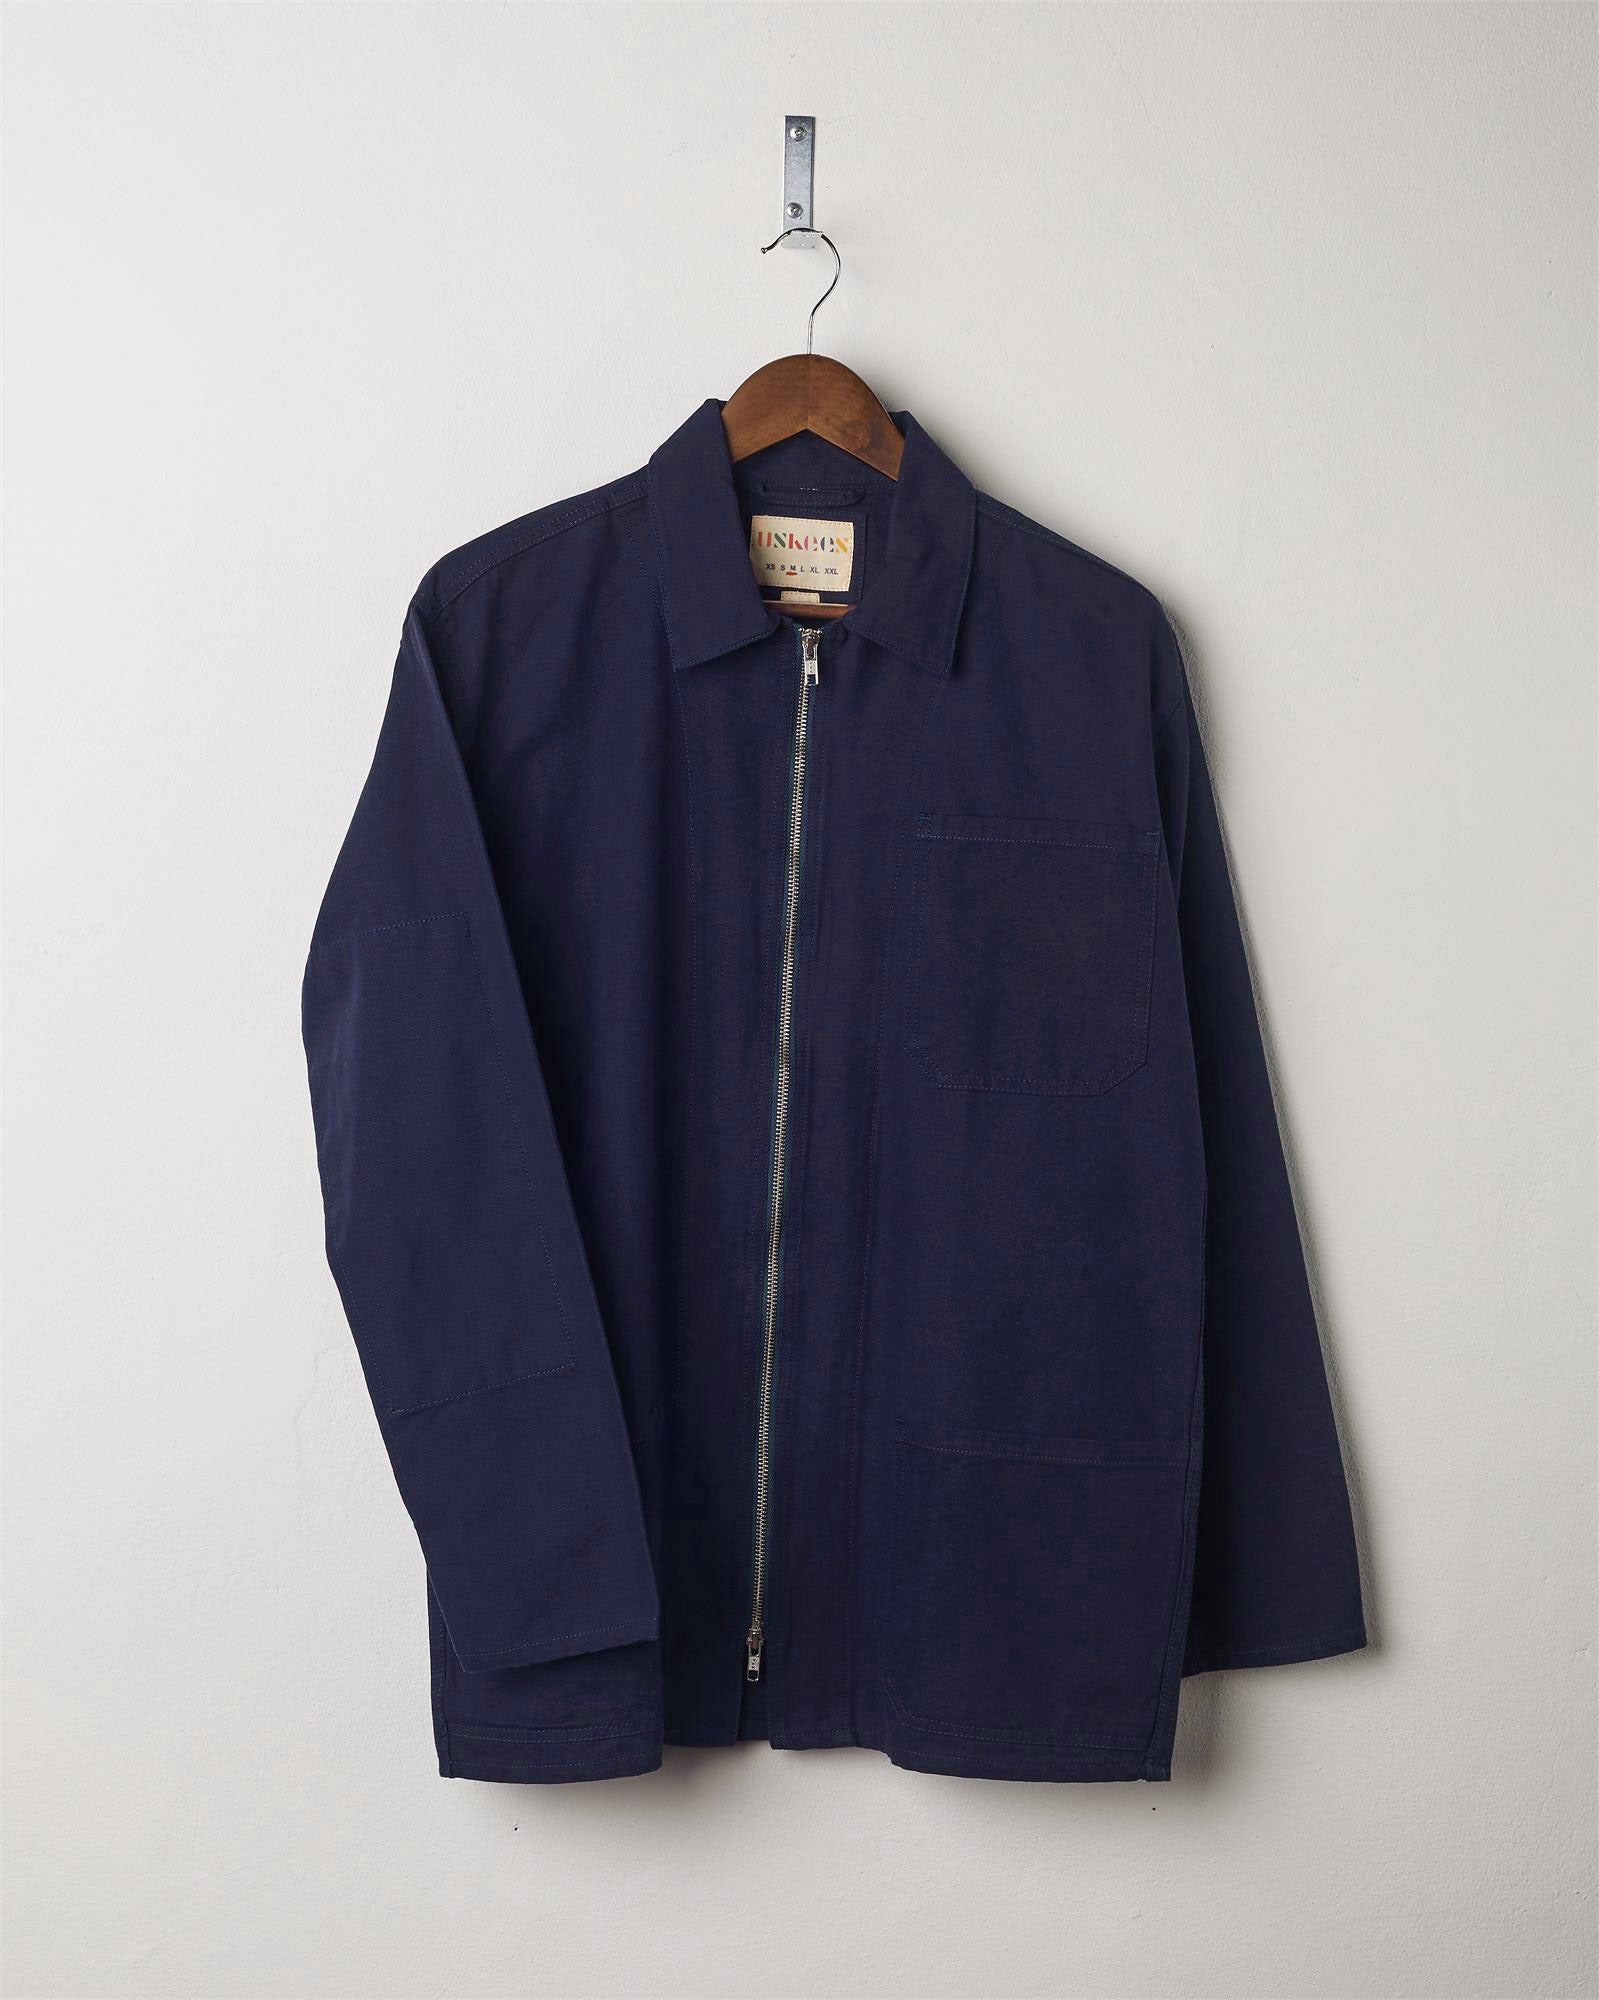 Front view of midnight blue, organic cotton zip front jacket from Uskees presented on hanger with neutral backdrop.